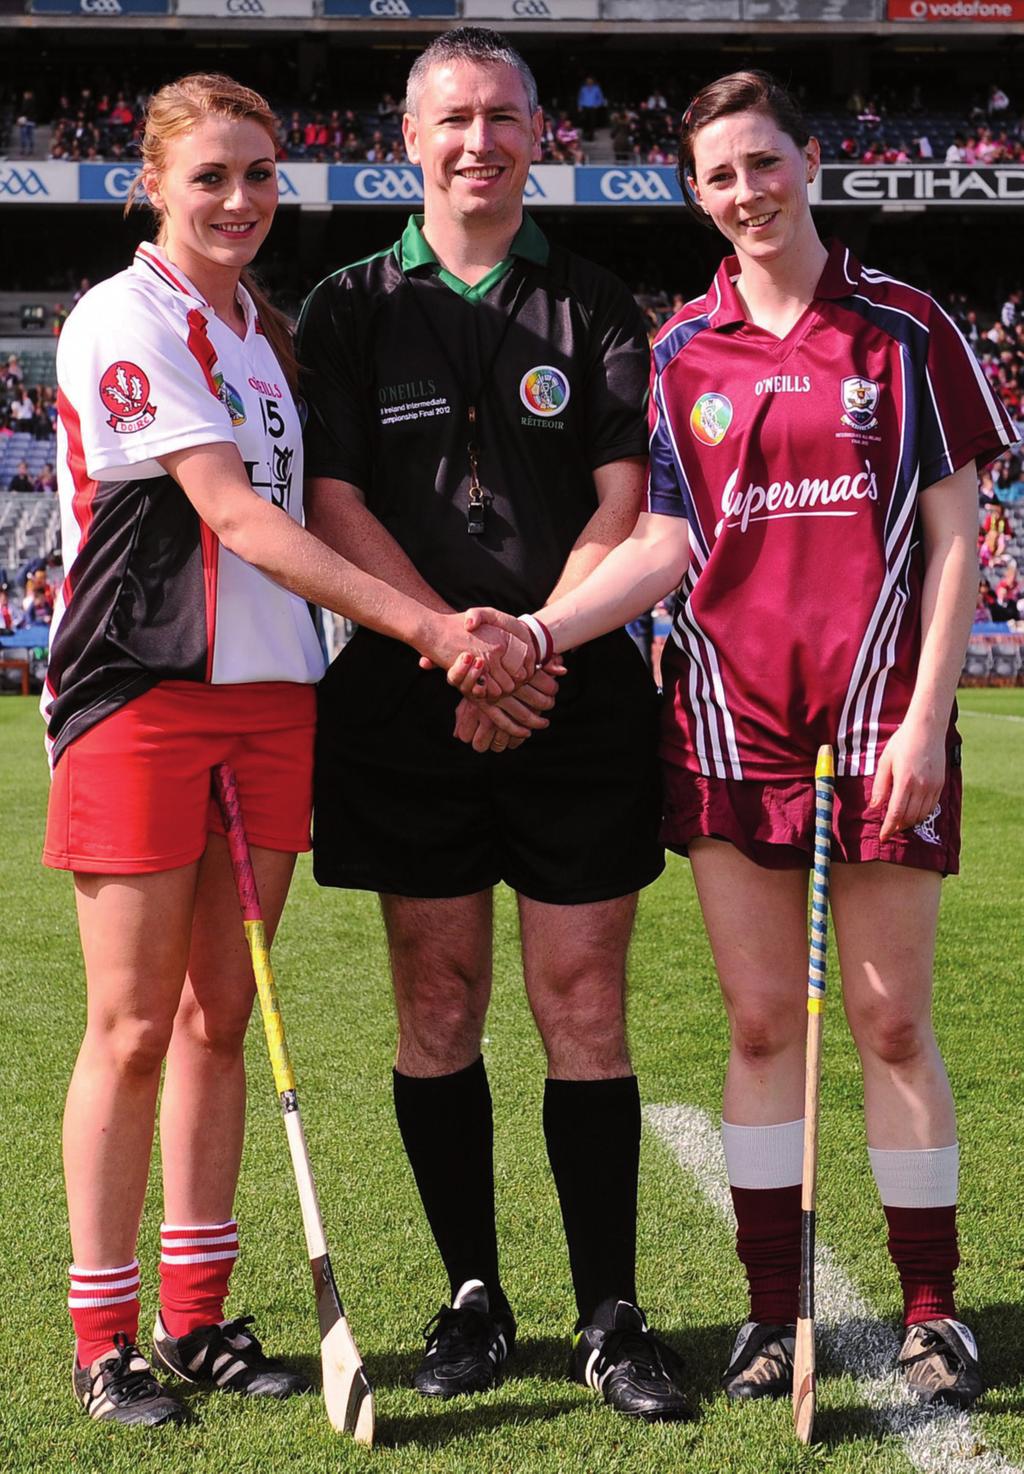 THE CAMOGIE ASSOCIATION REFEREE PATHWAY Level 2 Provincial Level 3